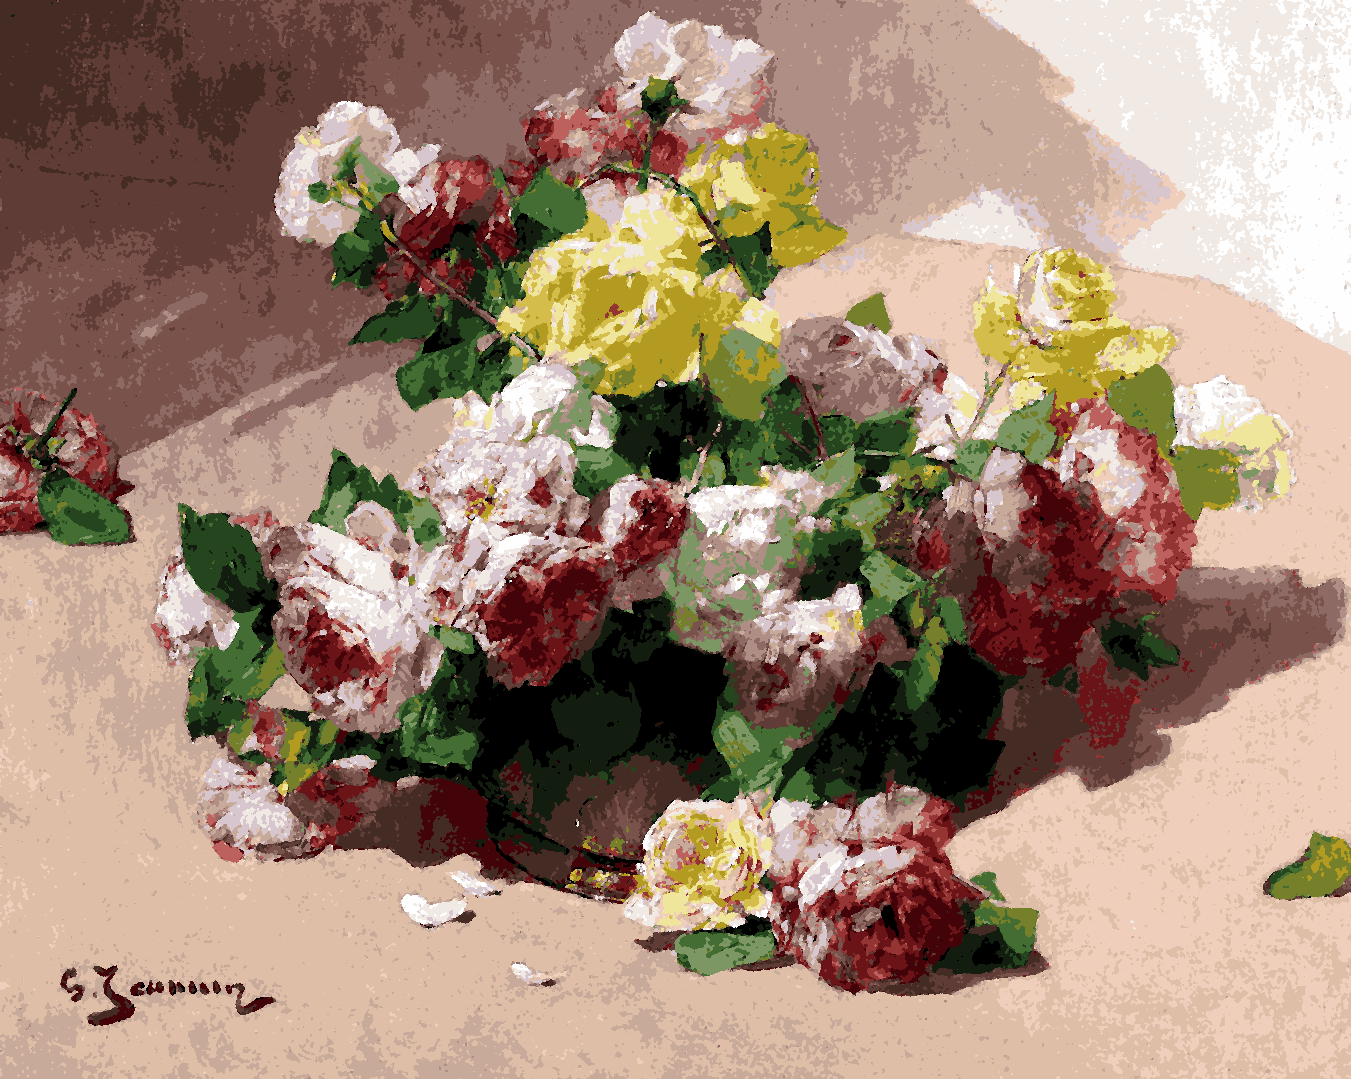 Roses by Georges Jeannin - Van-Go Paint-By-Number Kit